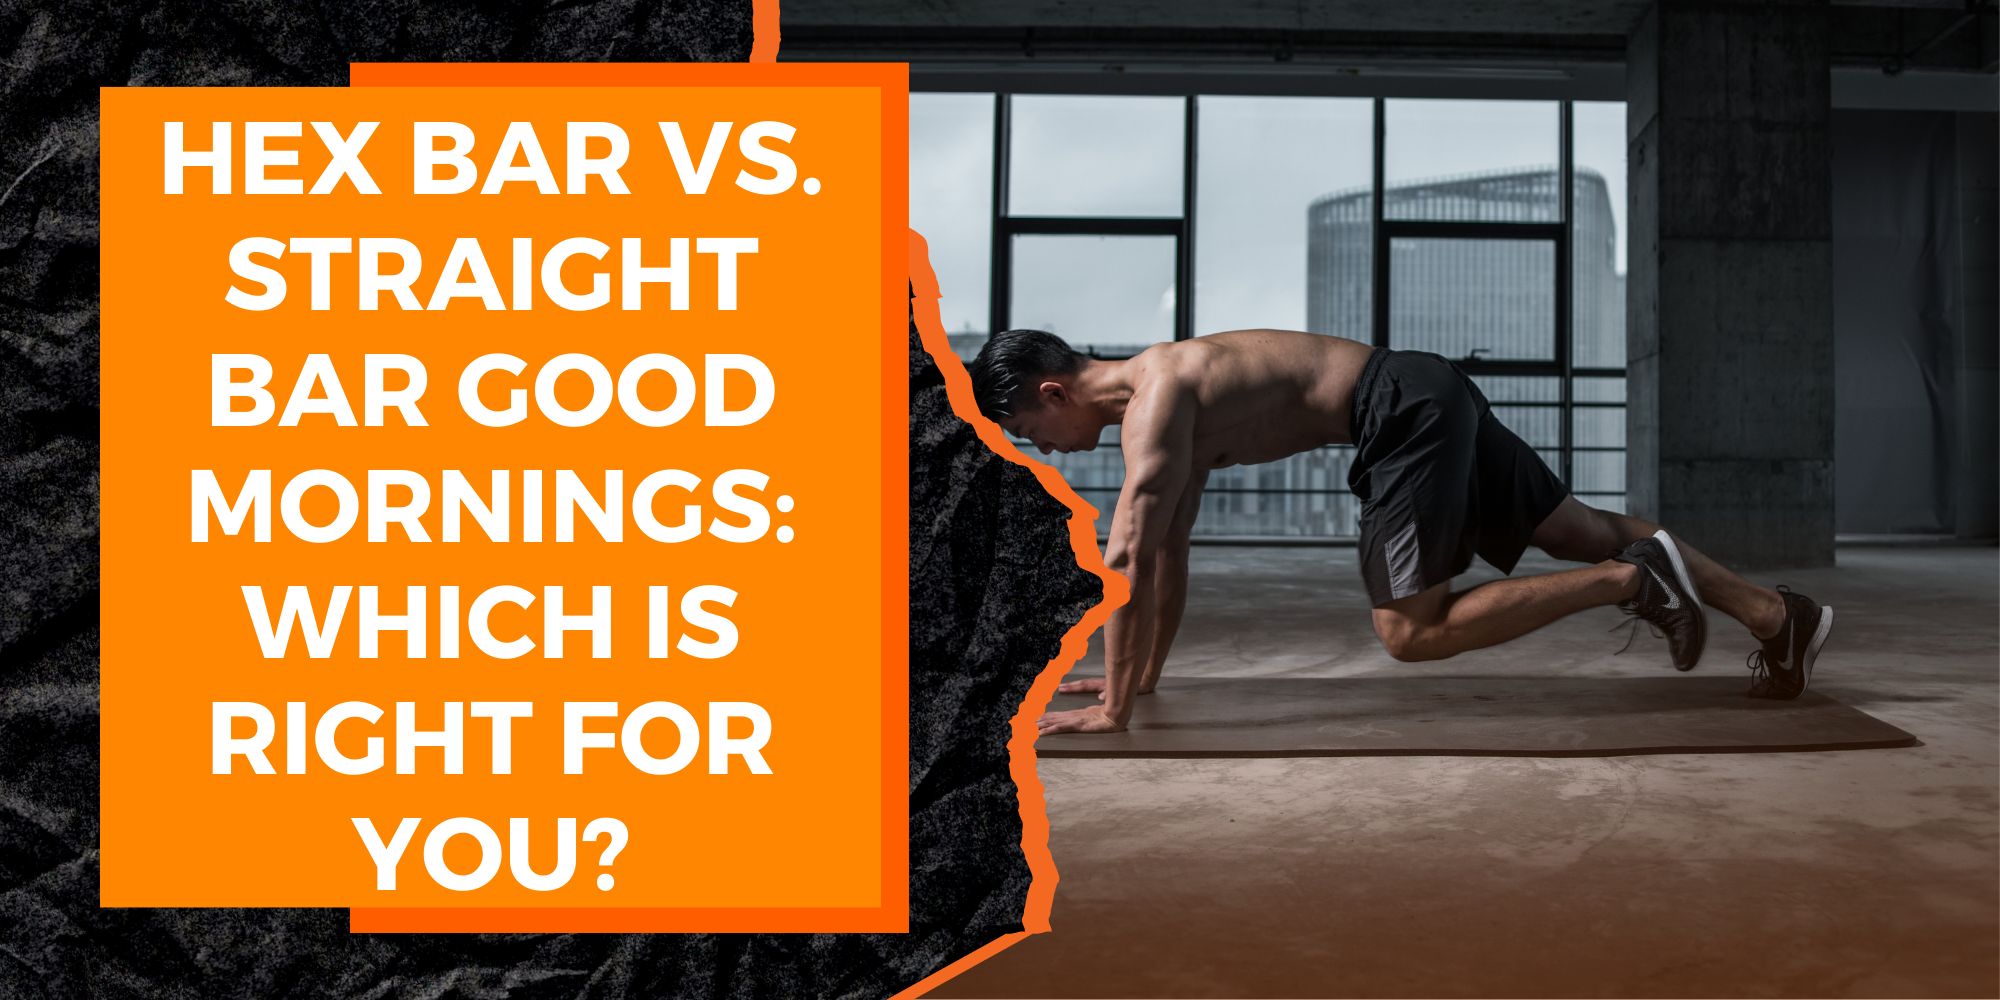 Hex Bar vs. Straight Bar Good Mornings: Which is Right for You?